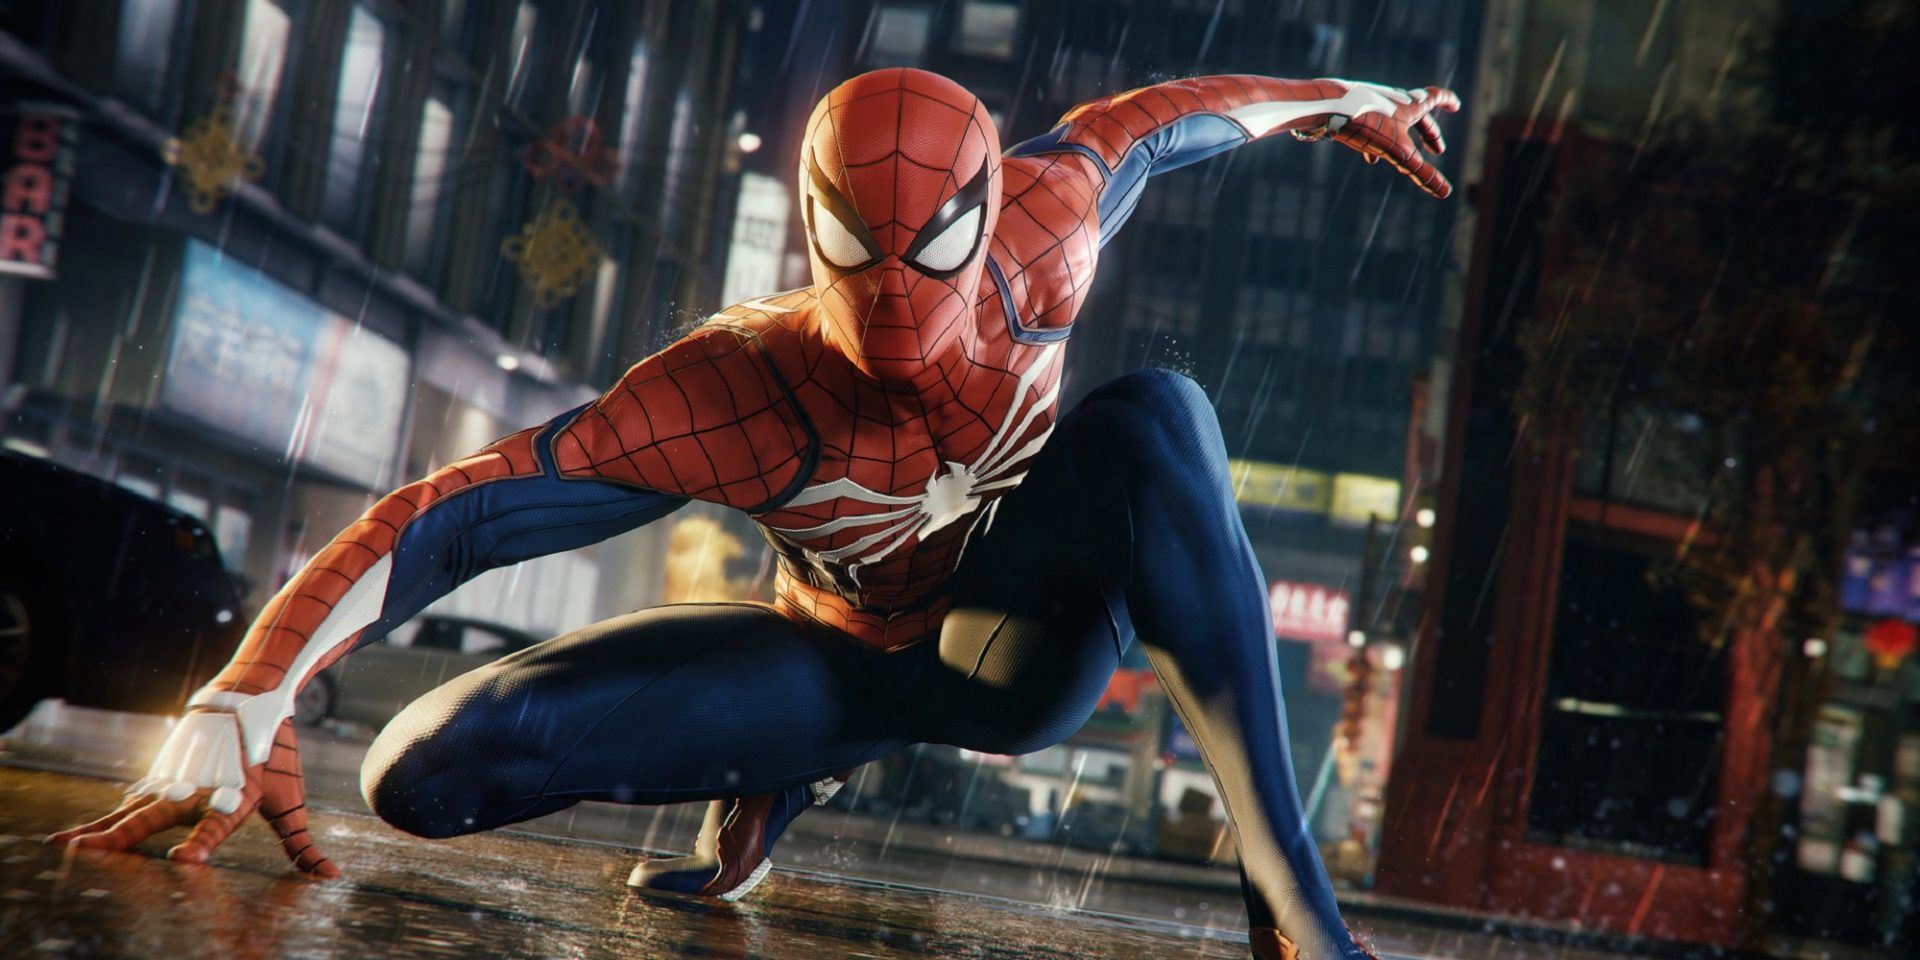 PlayStation PC Launcher evidence discovered in Spider Man PC files